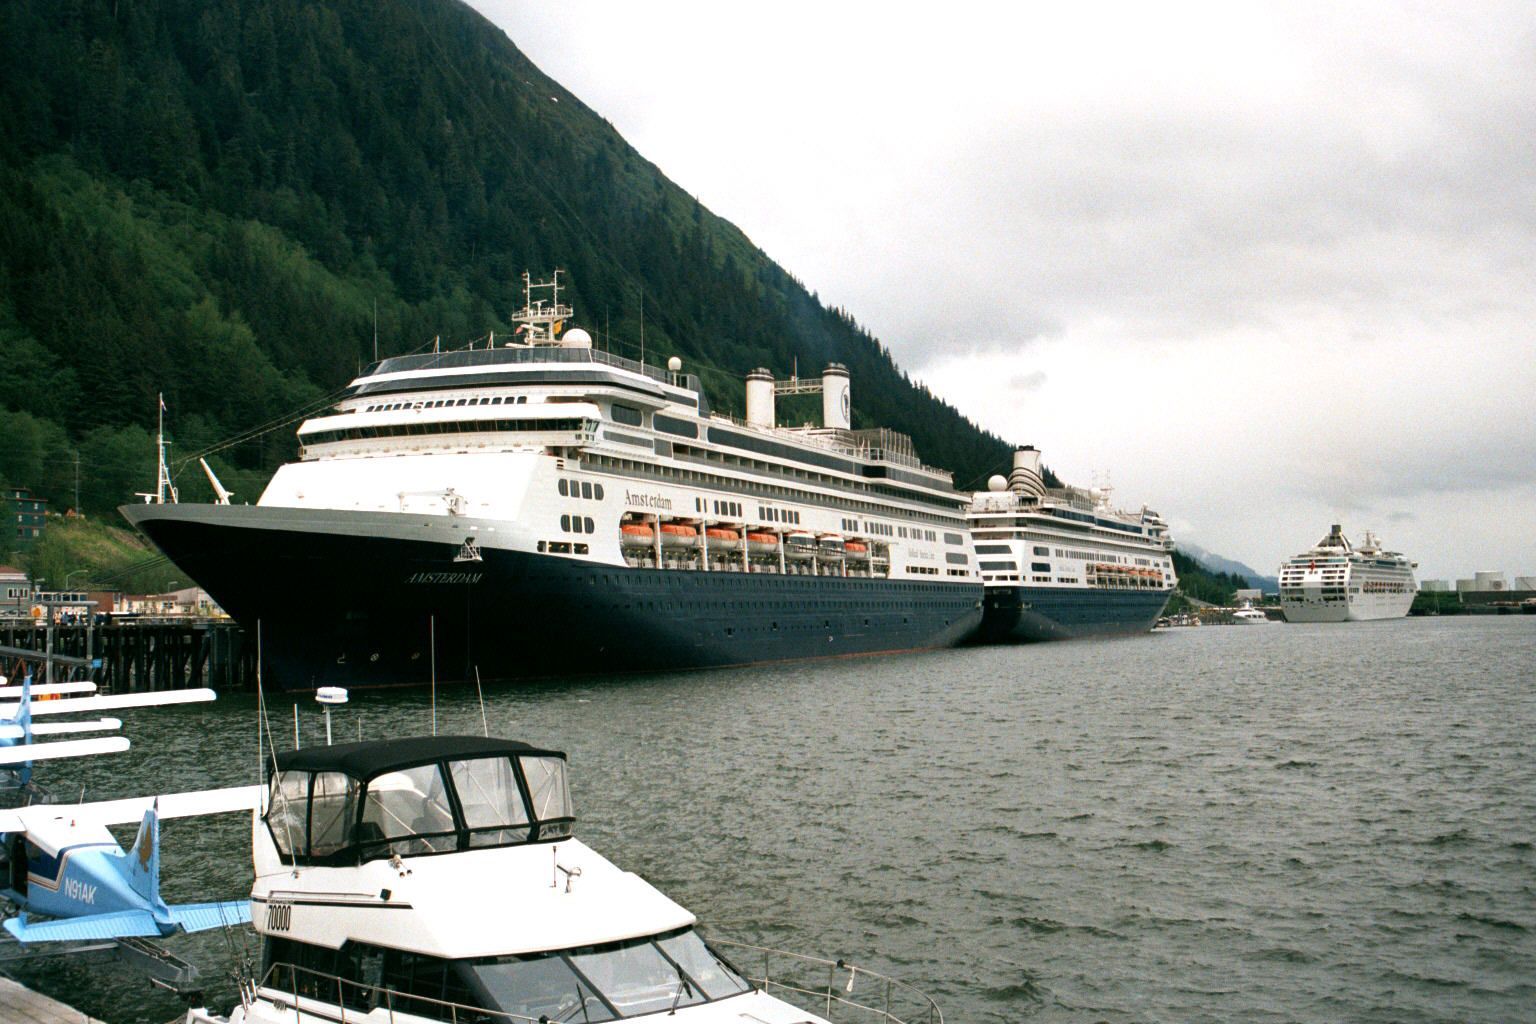 The Magic — Floating — Mountain: Notes on an Alaskan Cruise